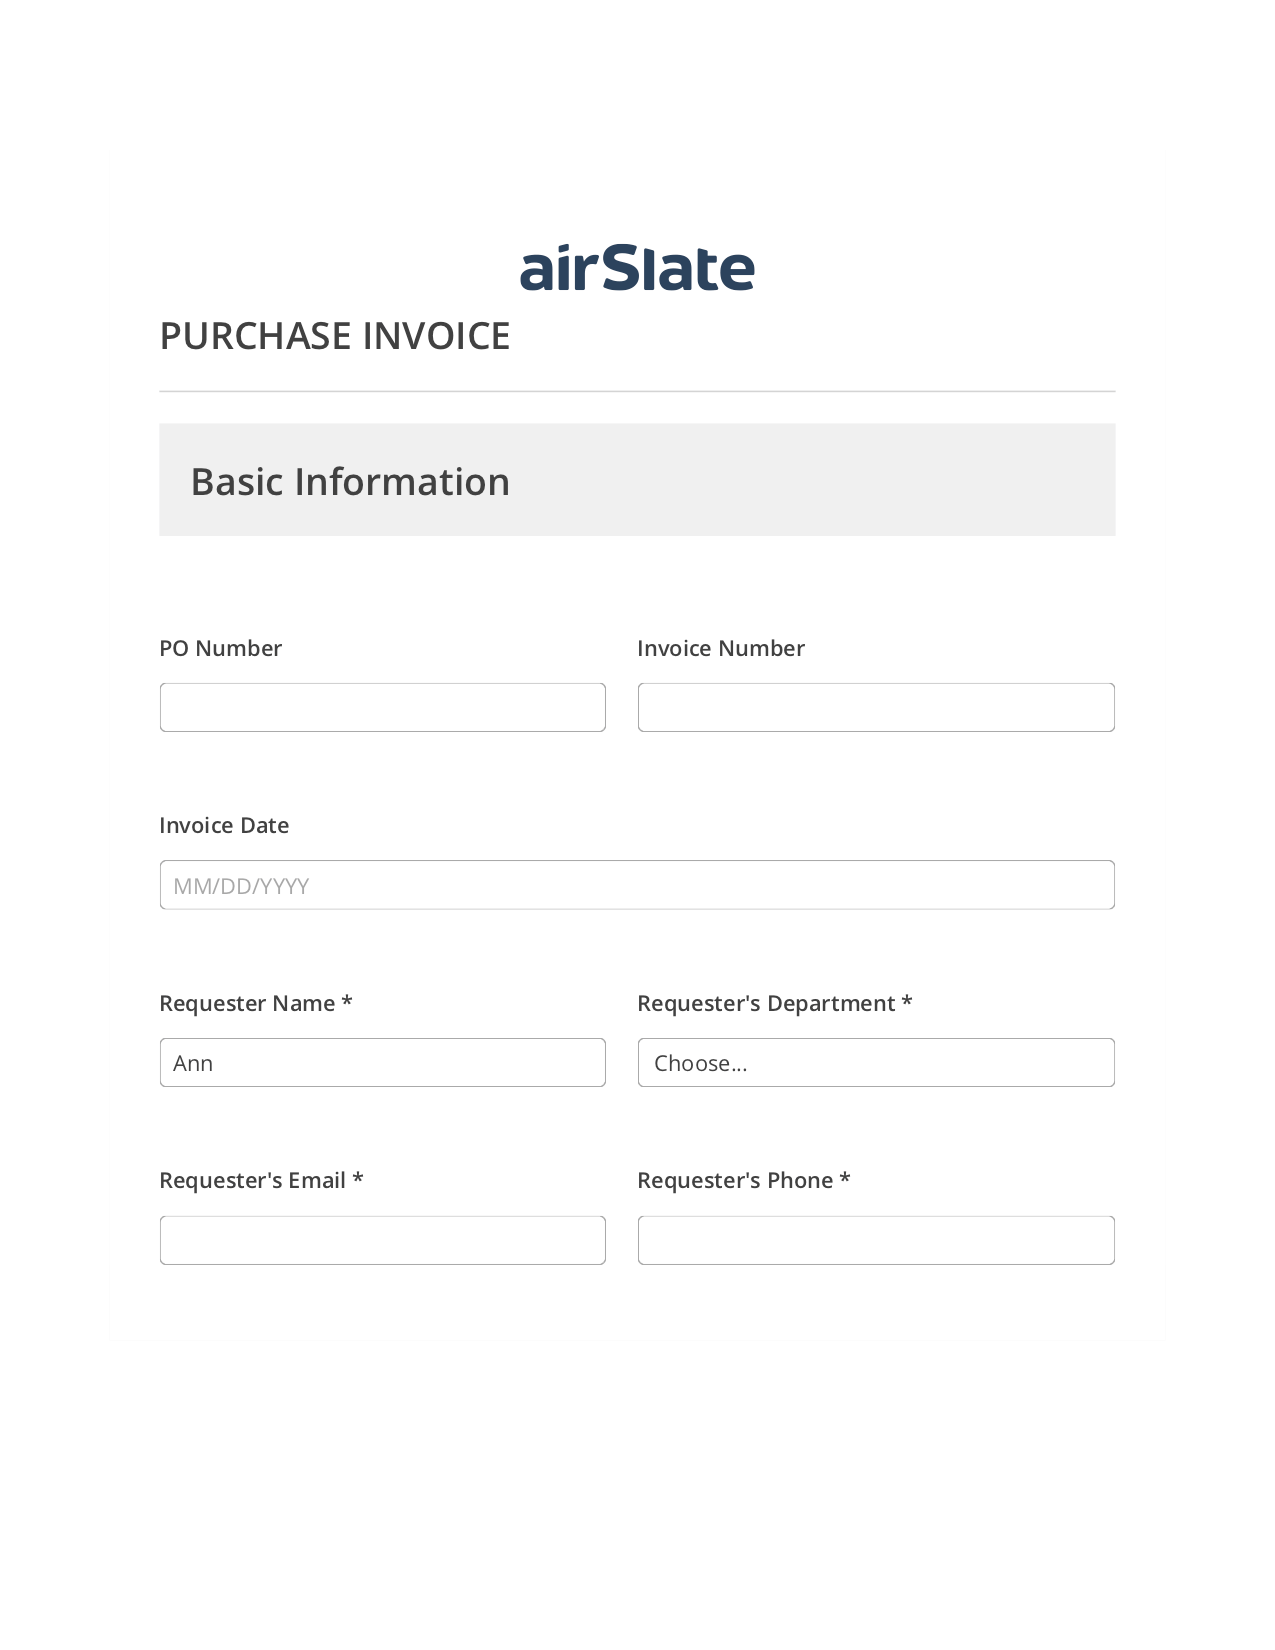 Purchase Invoice Flow Pre-fill from AirTable Bot